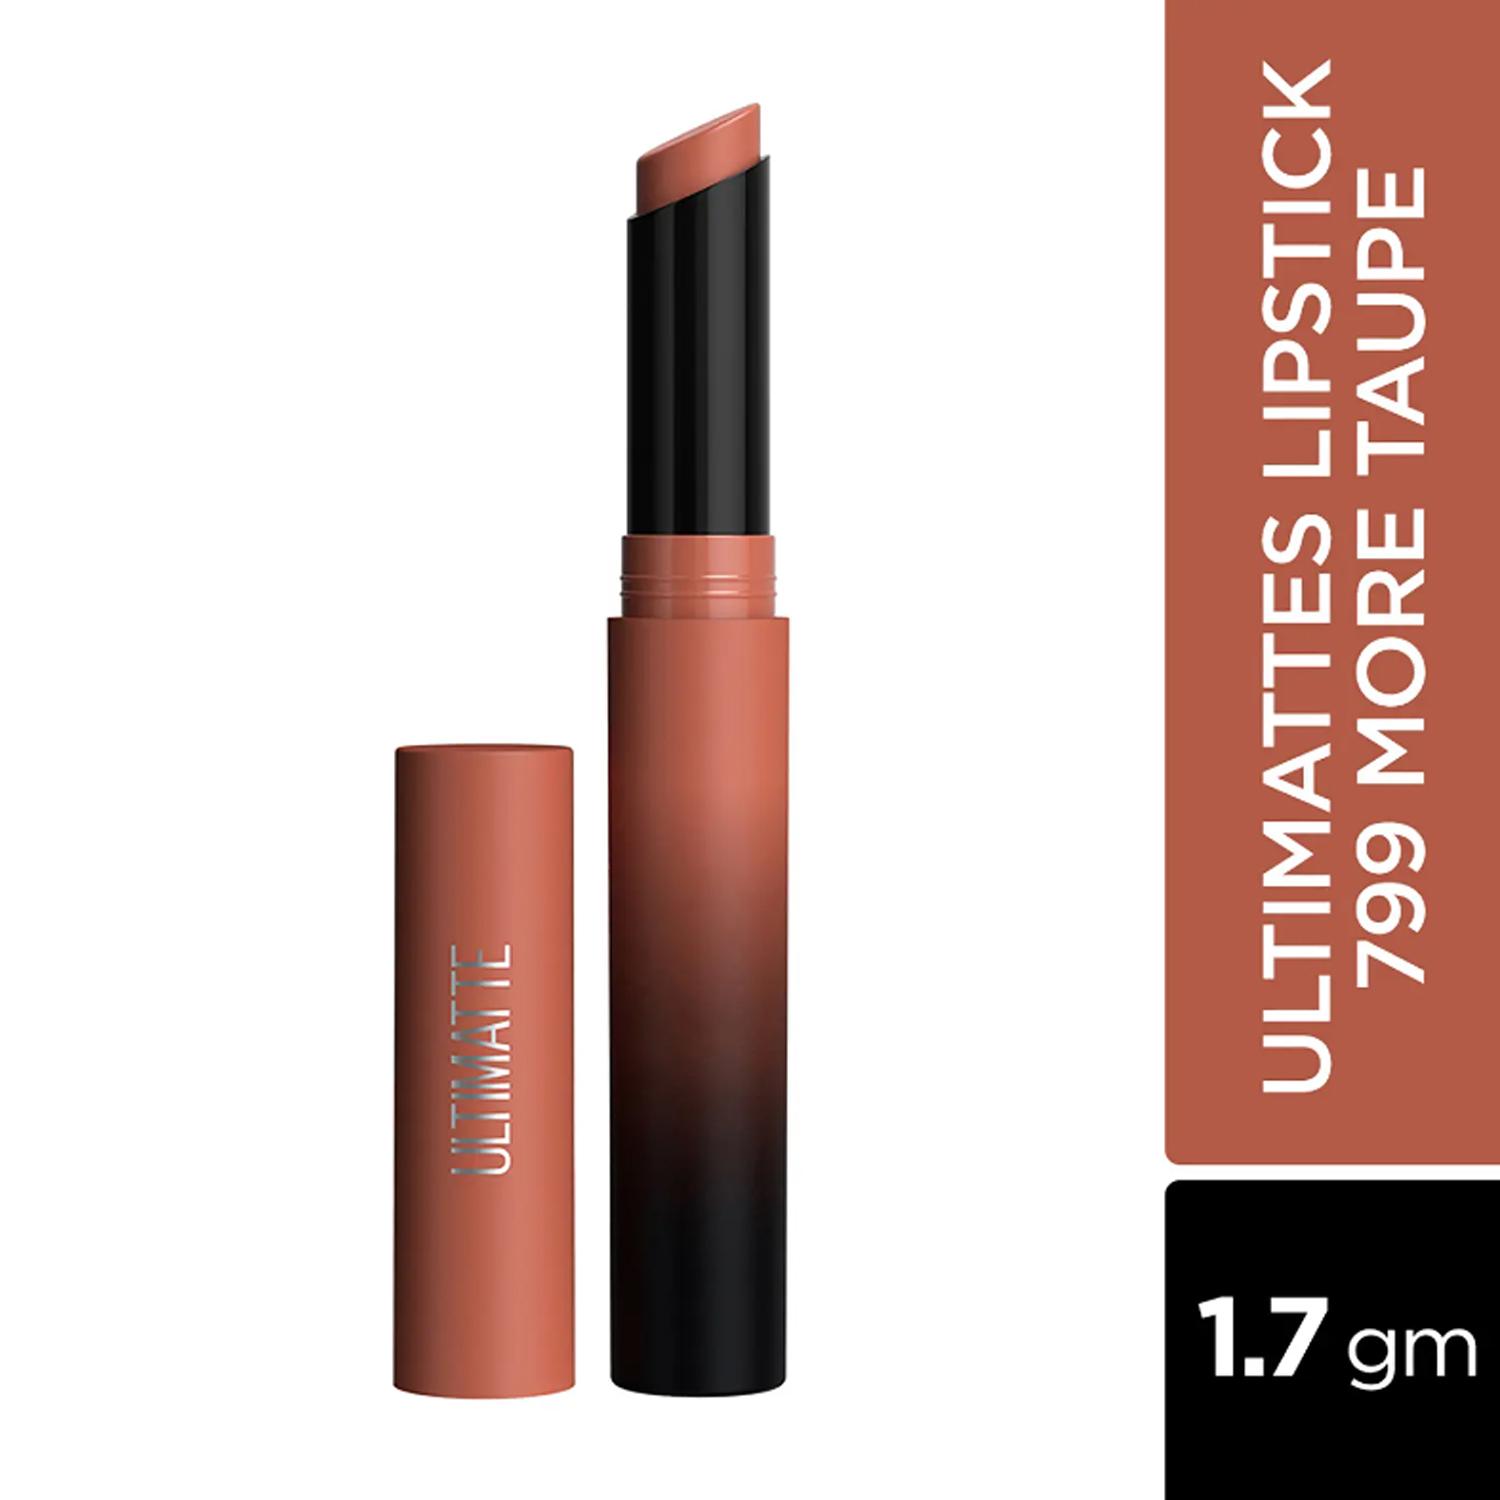 Maybelline New York | Maybelline New York Color Sensational Ultimattes Lipstick - More Taupe (1.7g)